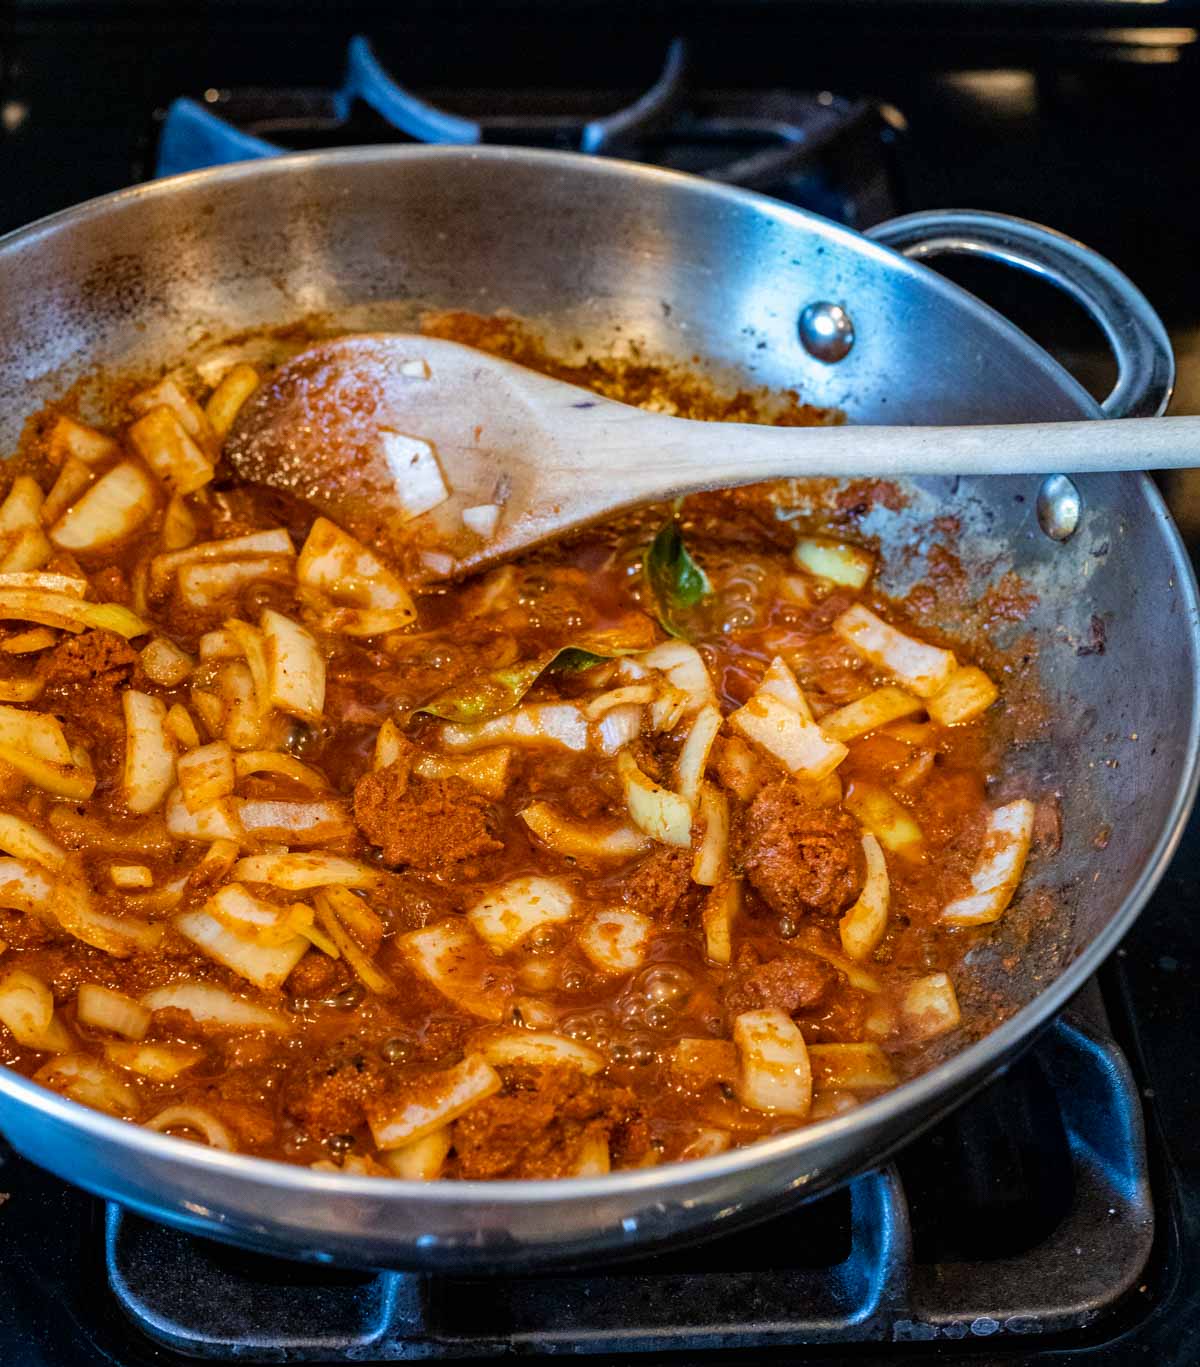 Onions and curry paste being stirred around in a skillet with a wooden spoon.